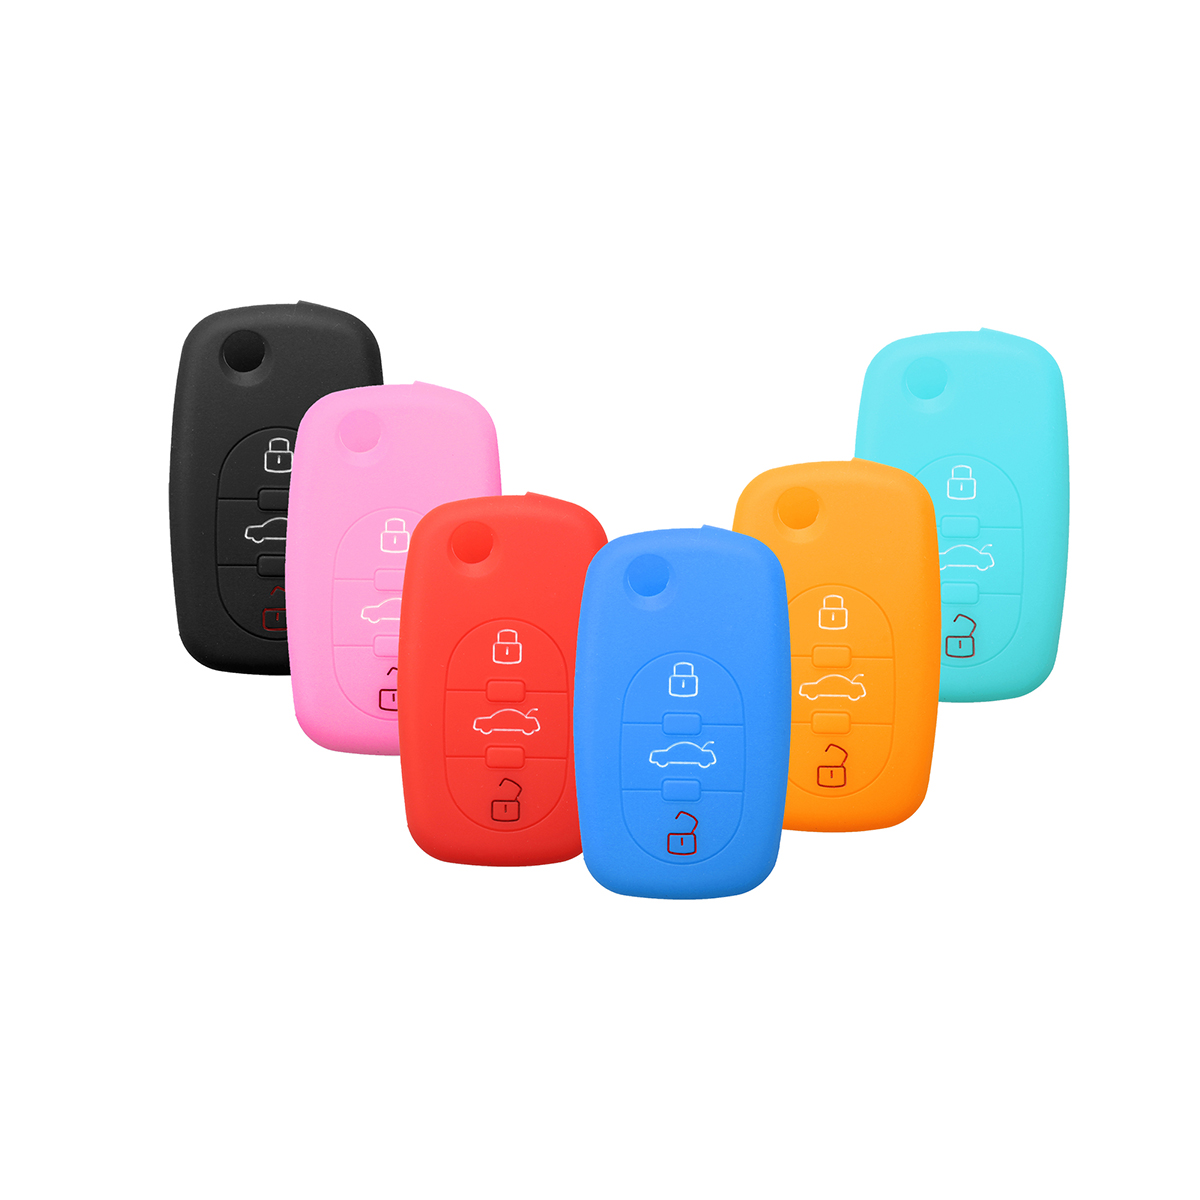 Red Silicone Case Cover For Audi A3 A4 A6 A8 TT Remote Flip Key 3 4 Buttons 3BT